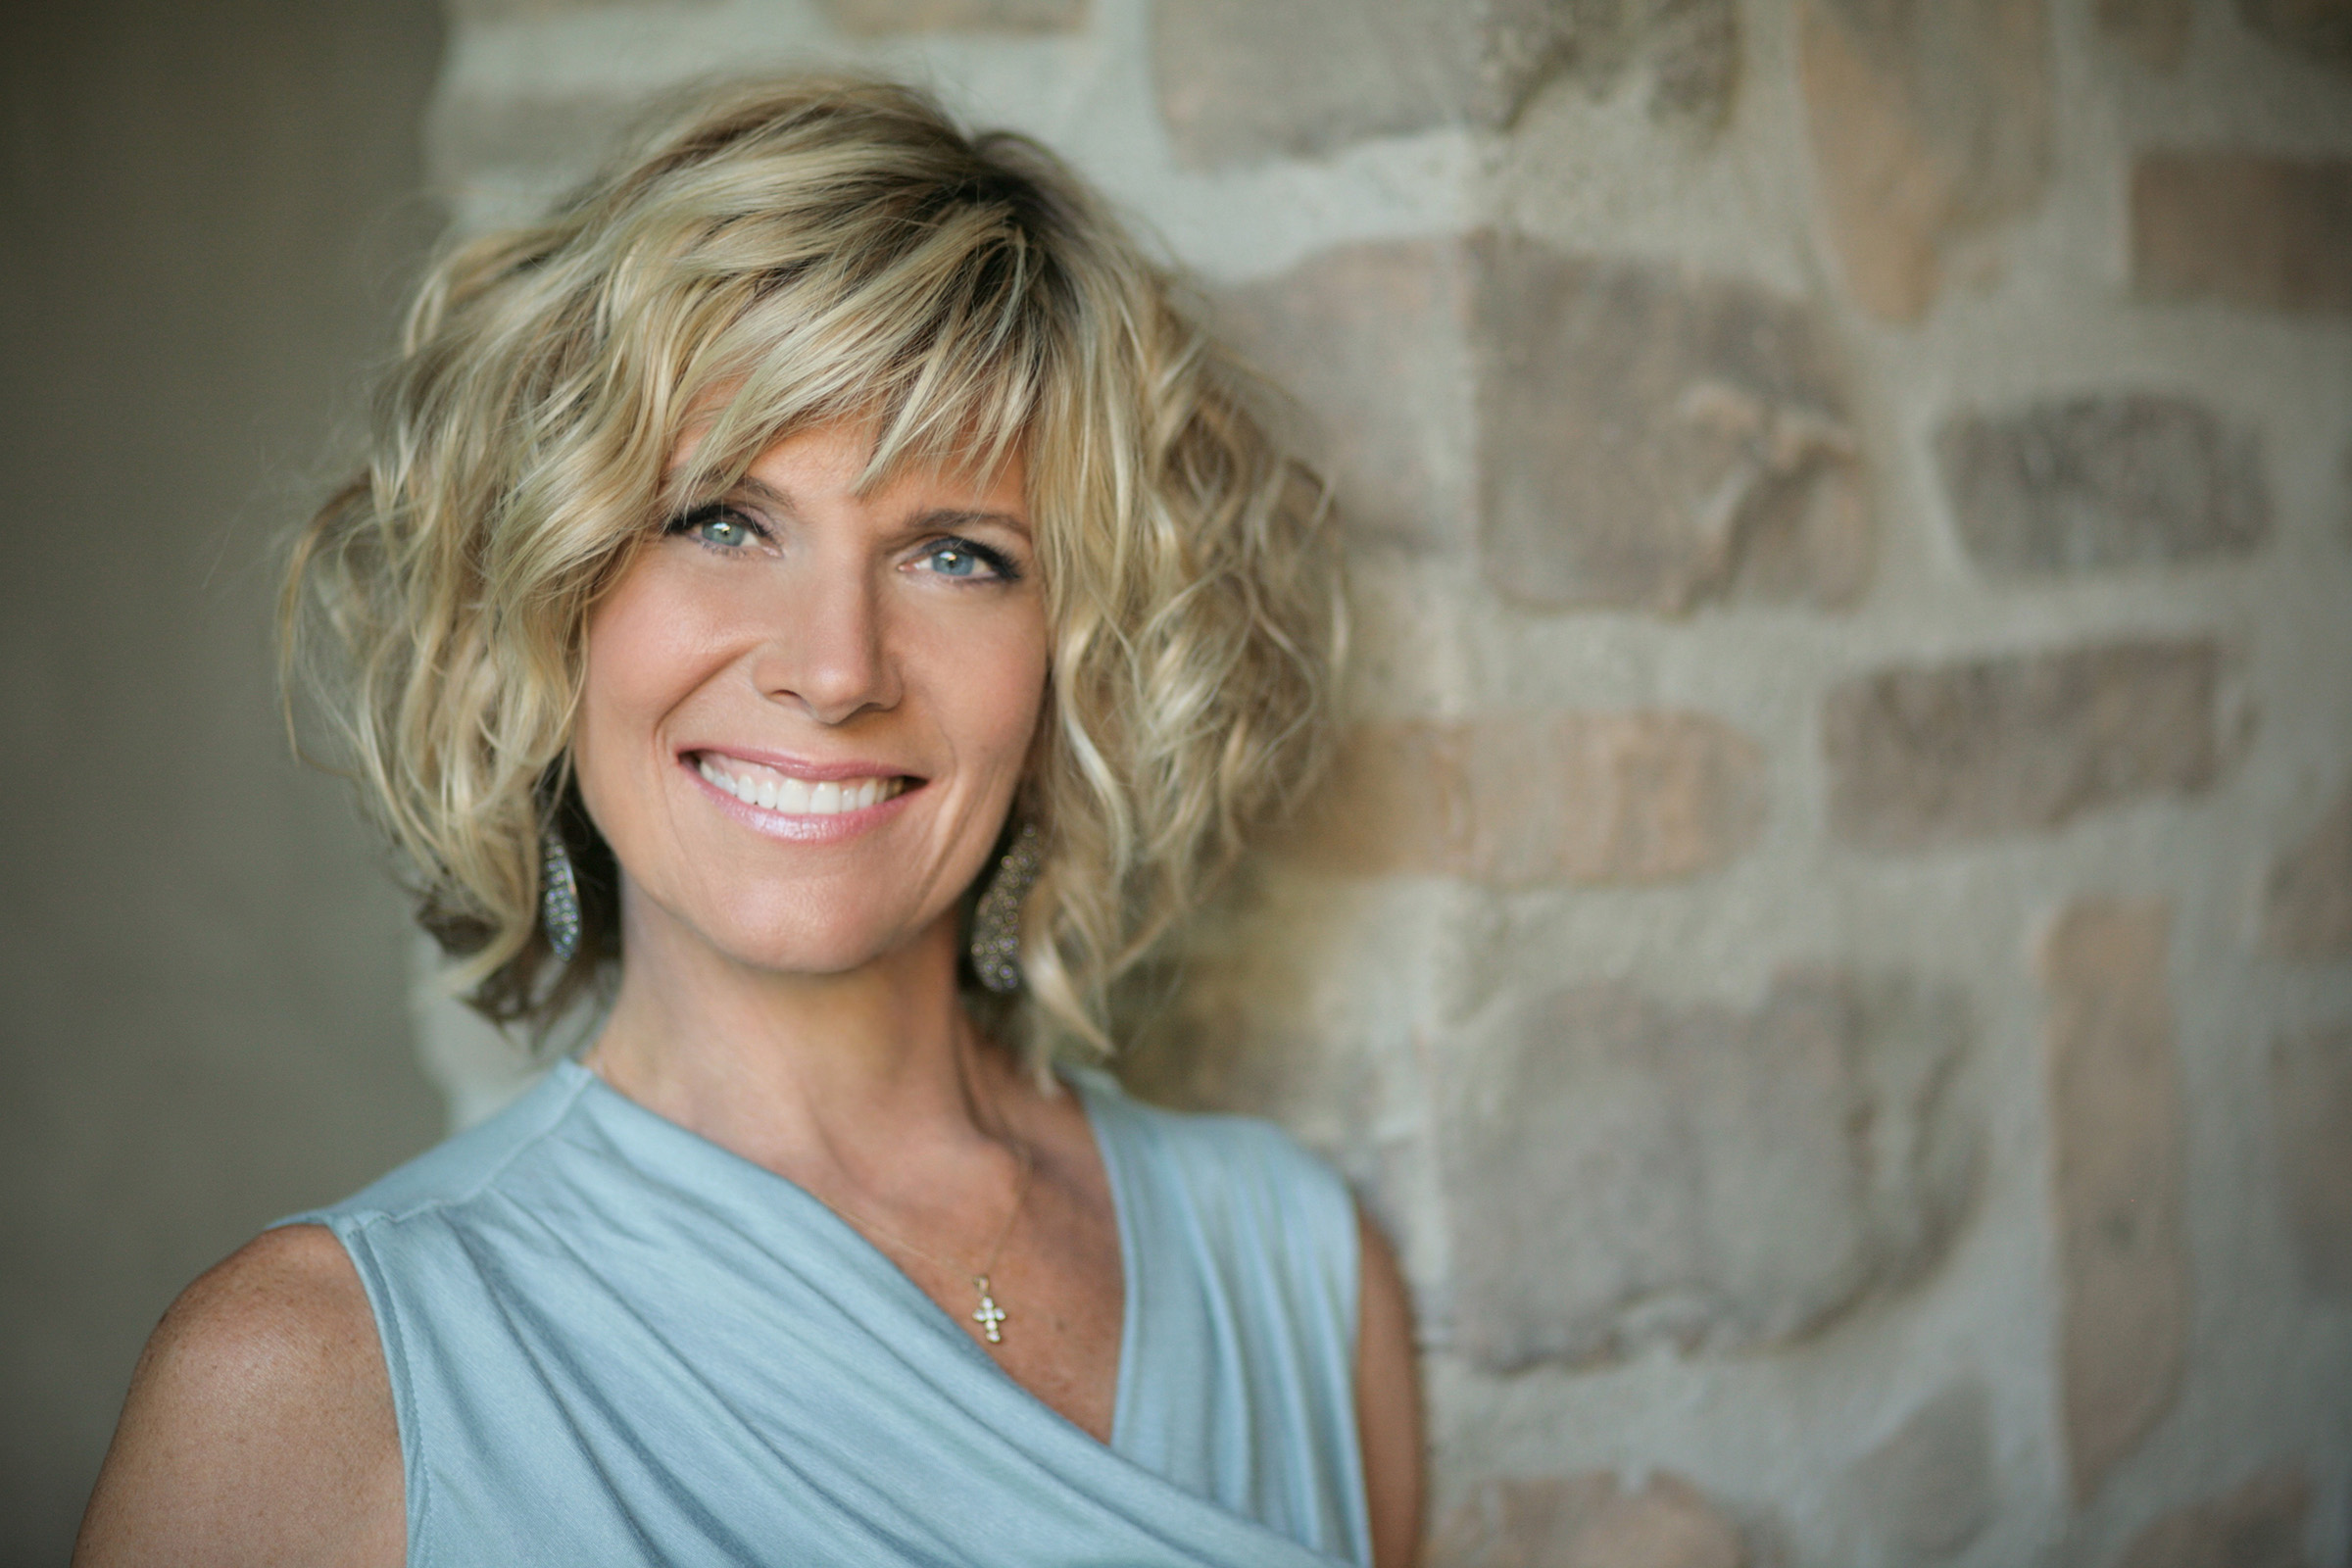 Singing star, clergy spouse Debby Boone will light up Bishop's Concert -  Episcopal Diocese of Los Angeles